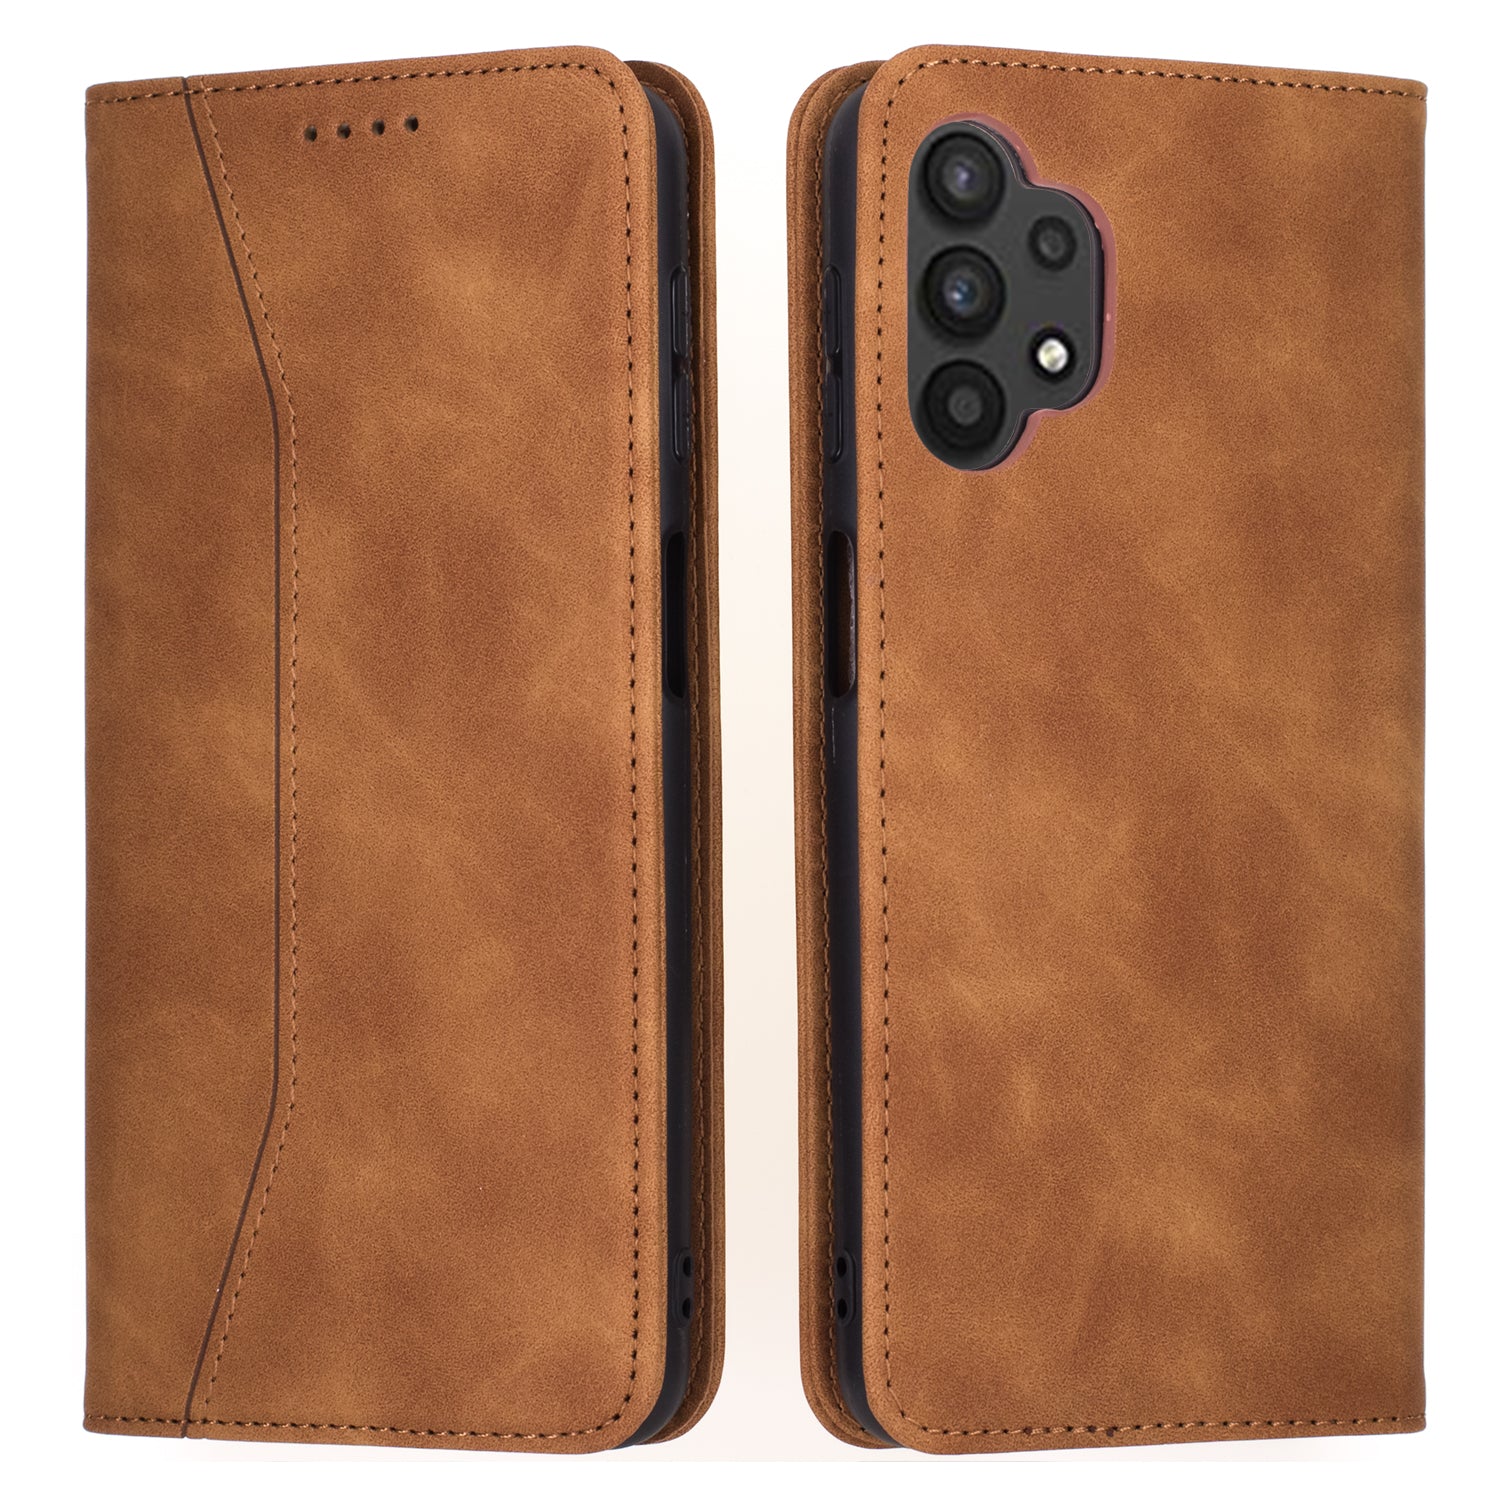 Bodycell Book Elegant Leather Wallet Case for Samsung A32 4G - Tan - Brown